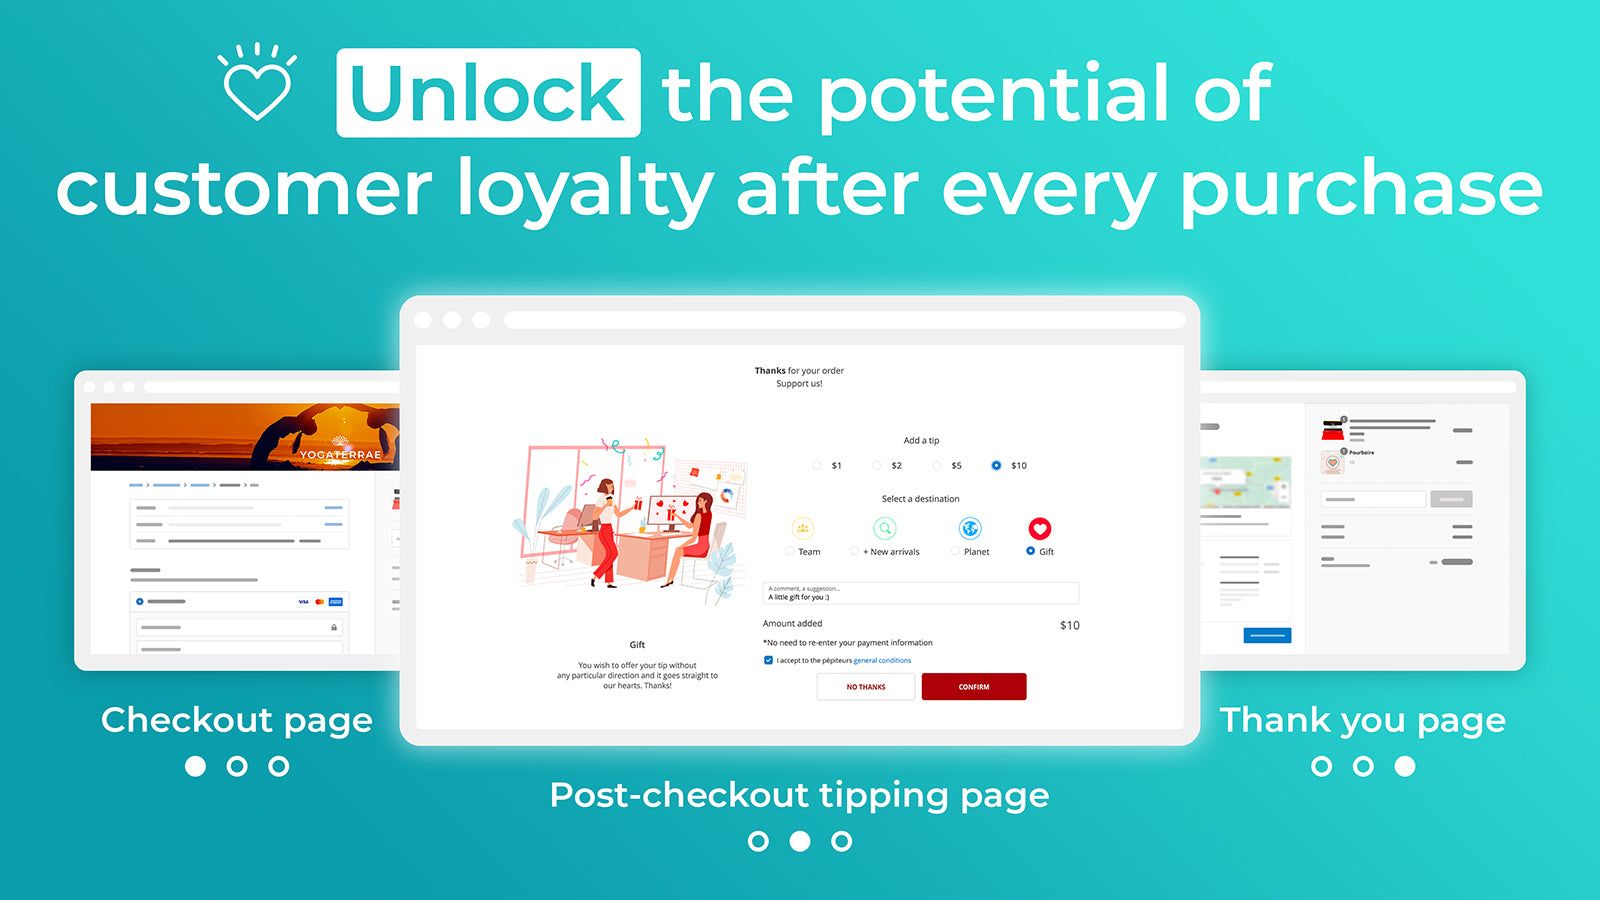 Unlock the power of customer loyalty from post purchase upsells.